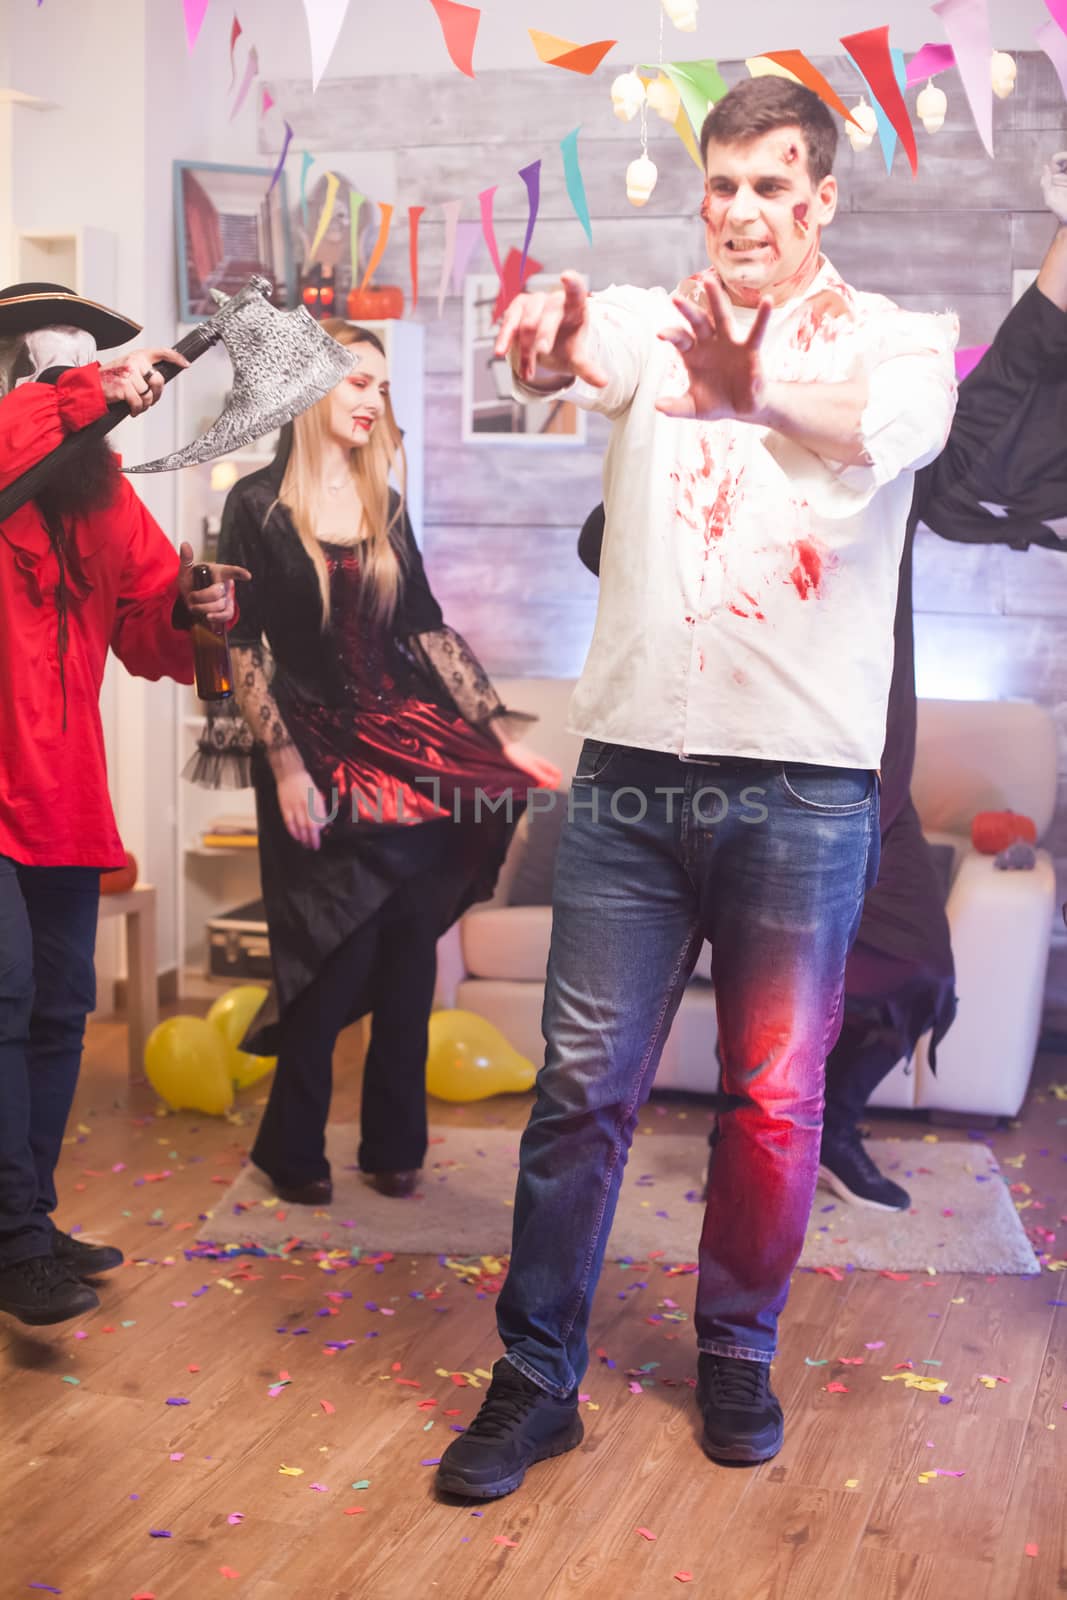 Man wearing a zombie costume with creepy expression at halloween celebration with his friends.